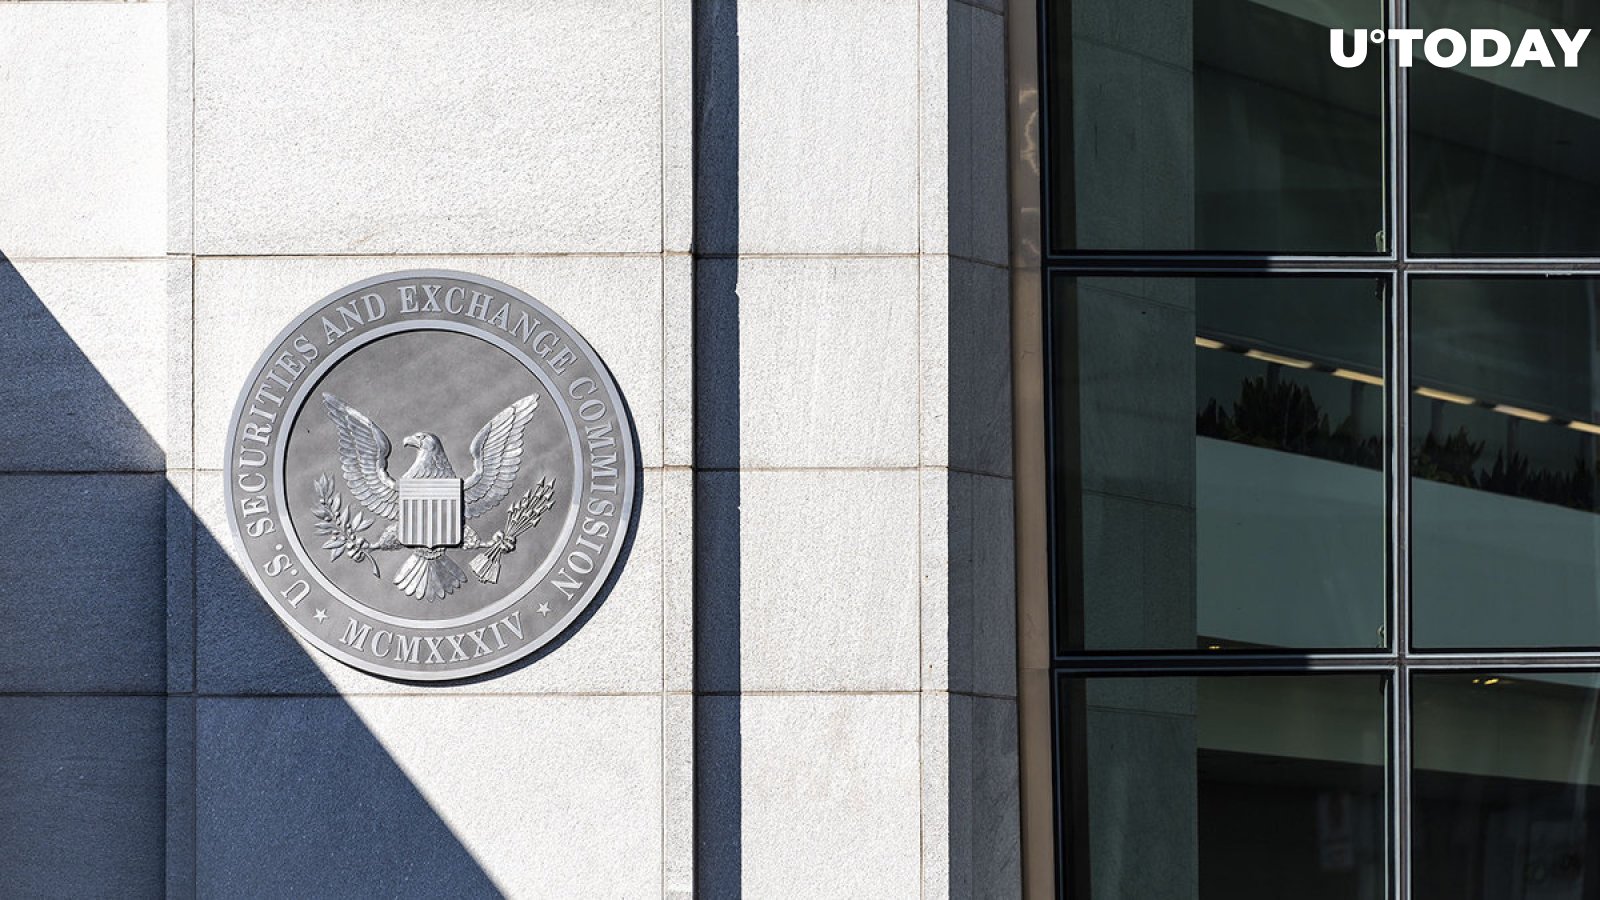 Crypto Exchange and Founder Sued by SEC in Wake of Binance CFTC Lawsuit